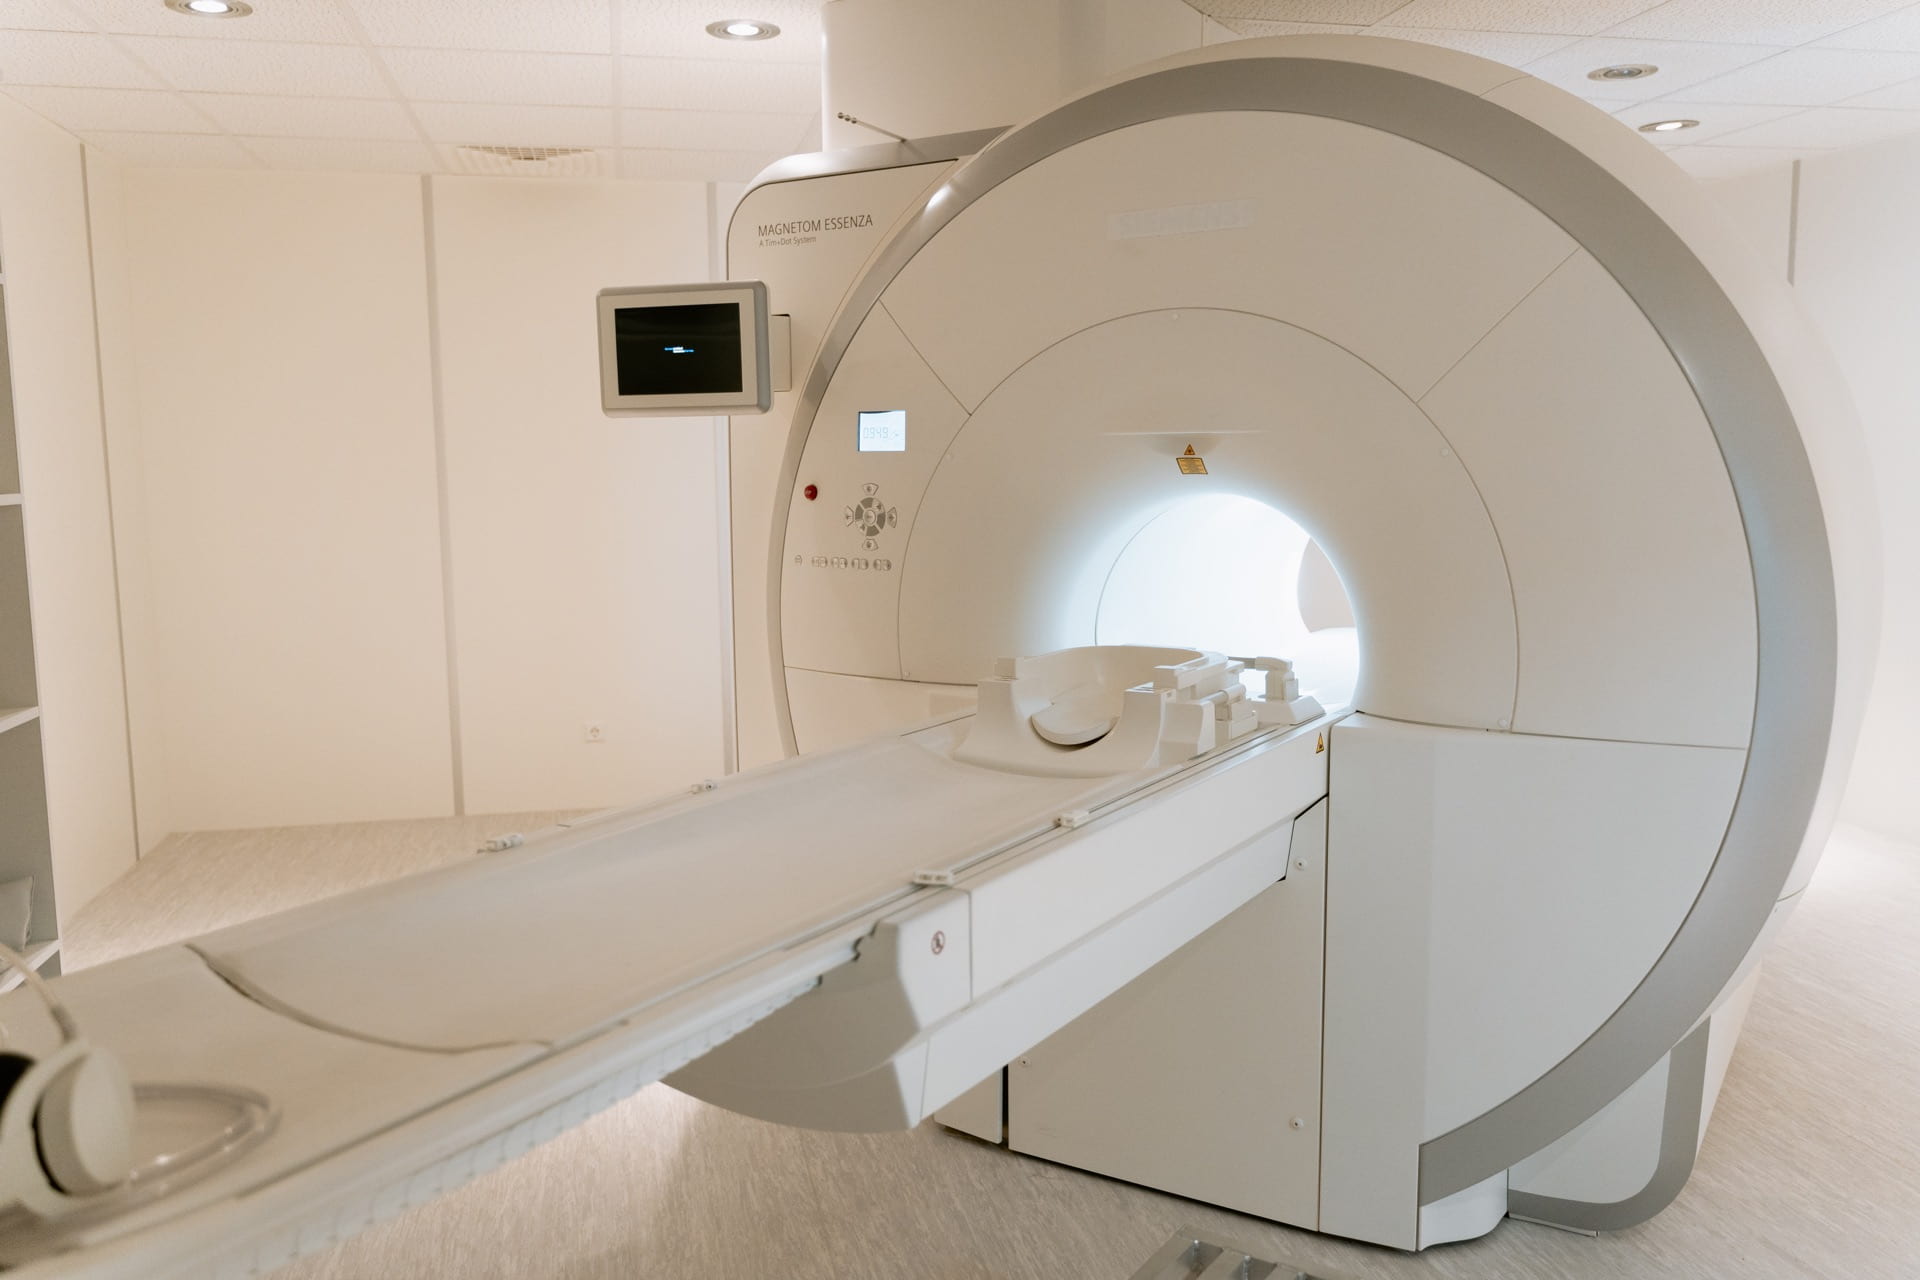 Image of a bed connected to an MRI machine.